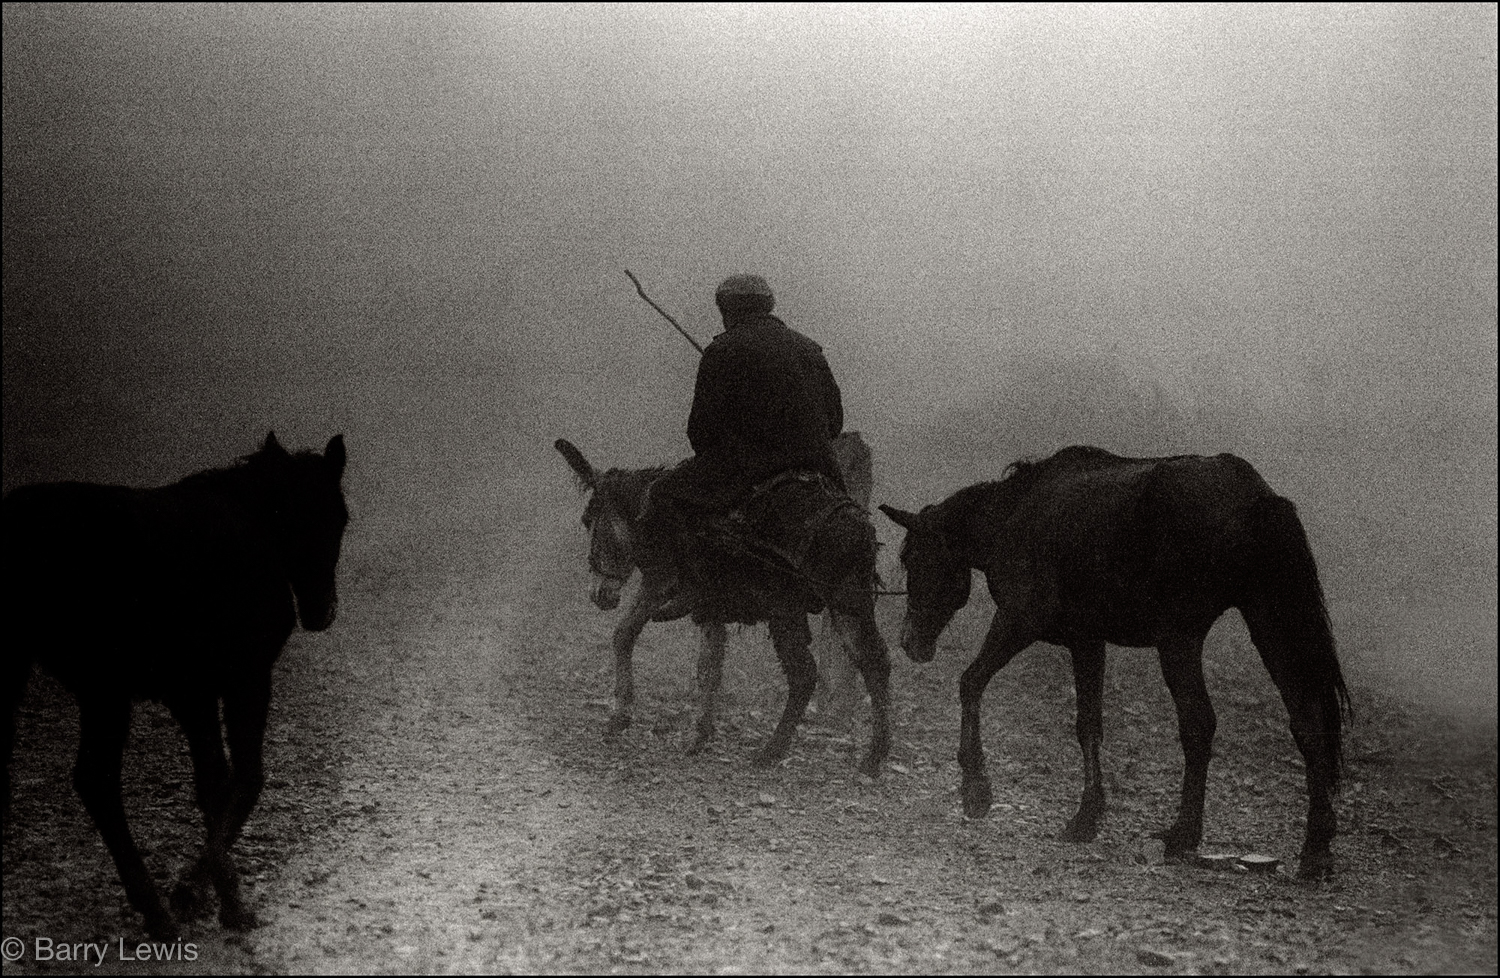  Farmer riding into the winter mist along the ancient Camín Real de la Mesa, Spain 1985.
For centuries the Camín was one of the few points of contact between the provinces of León and Asturias. The route has been used for 5,000 years, traversing a mo